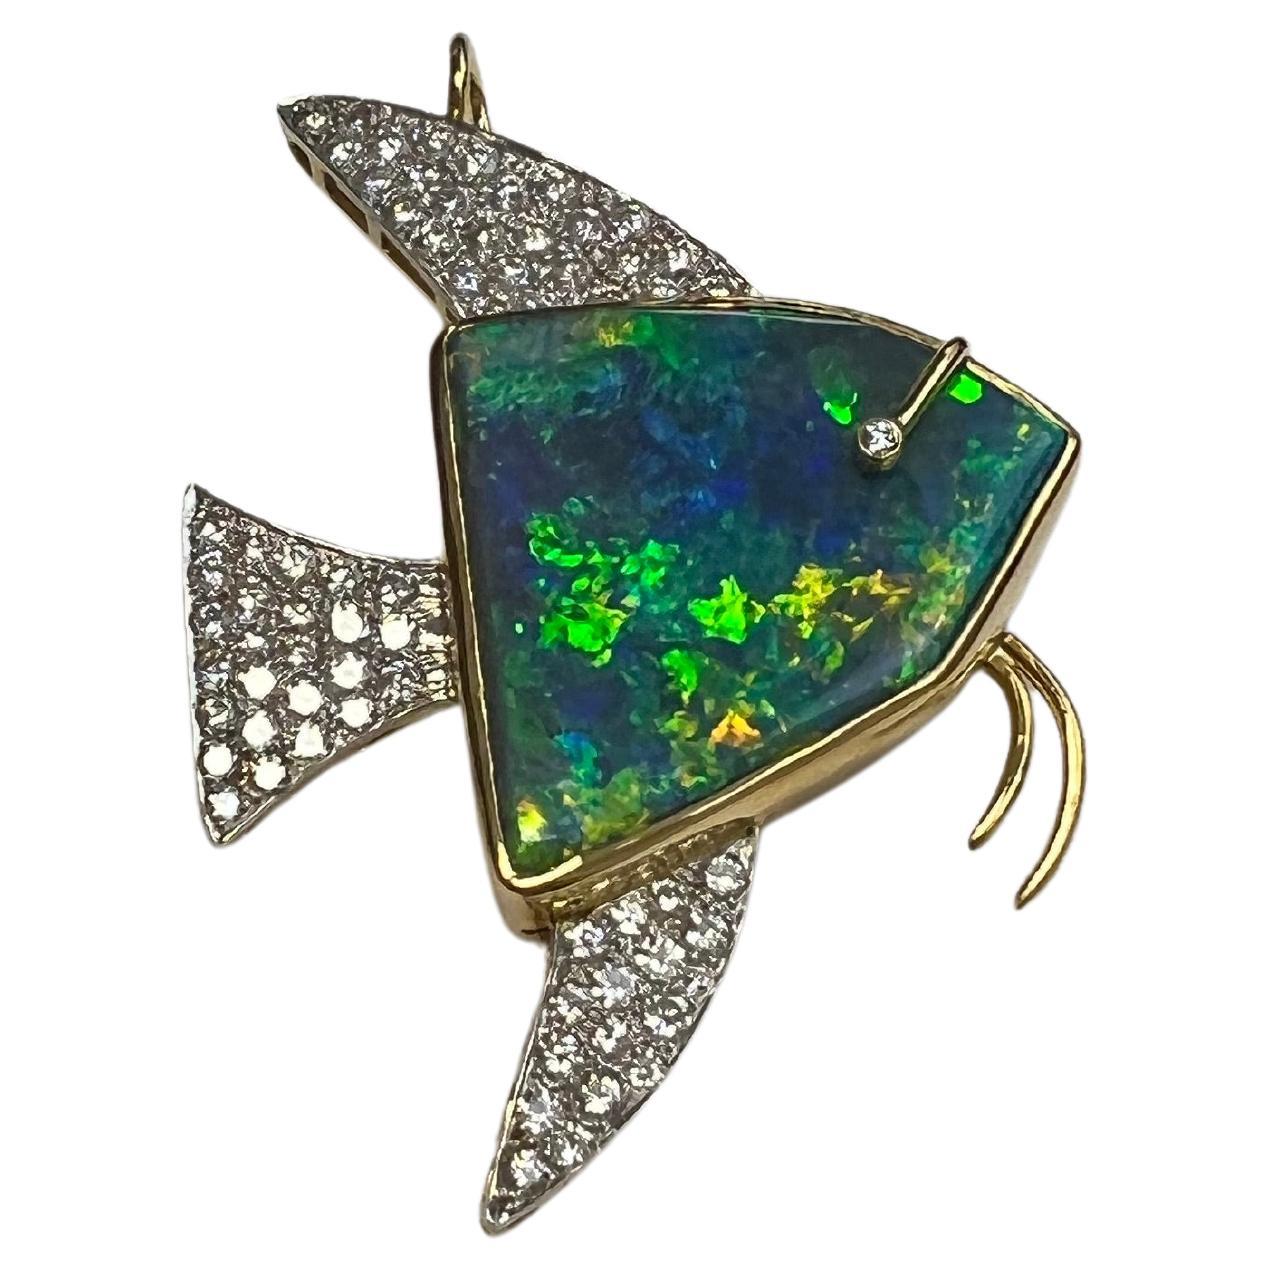 Lady's Black Opal and Diamonds "Fish" Broach in 14k Yellow and White Gold